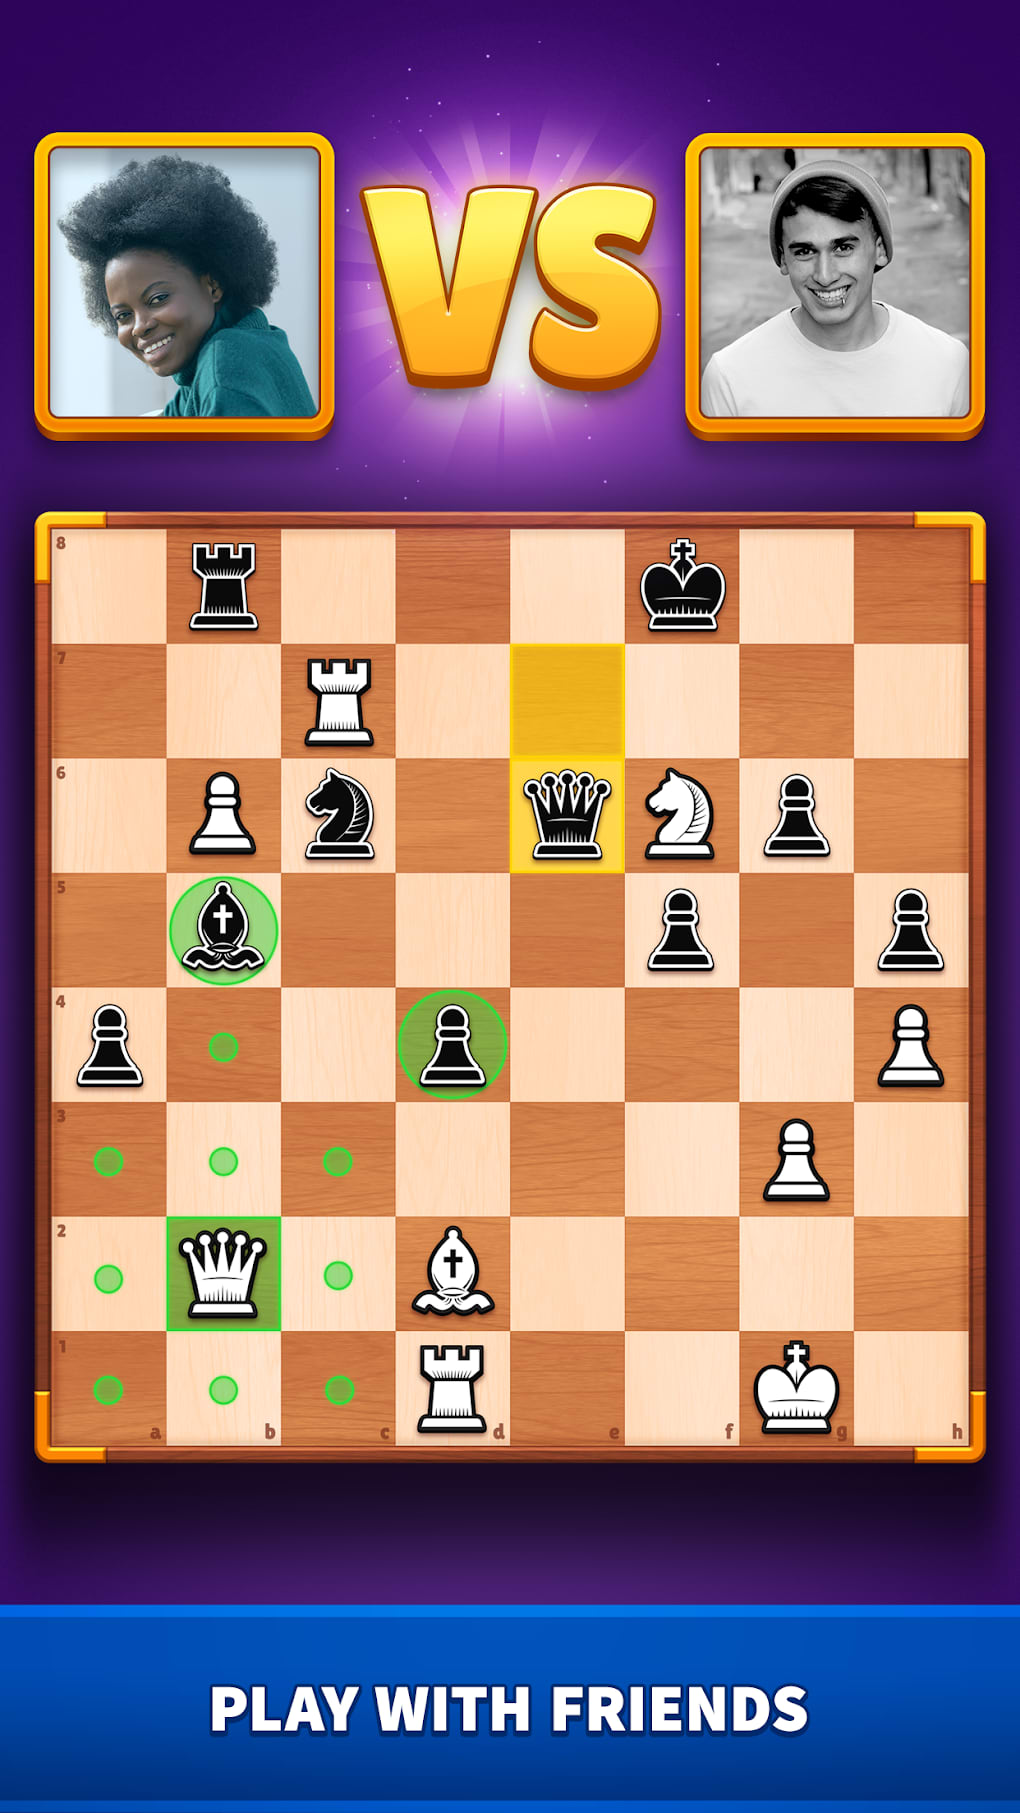 OpeningTree - Chess Openings 4.6 Free Download